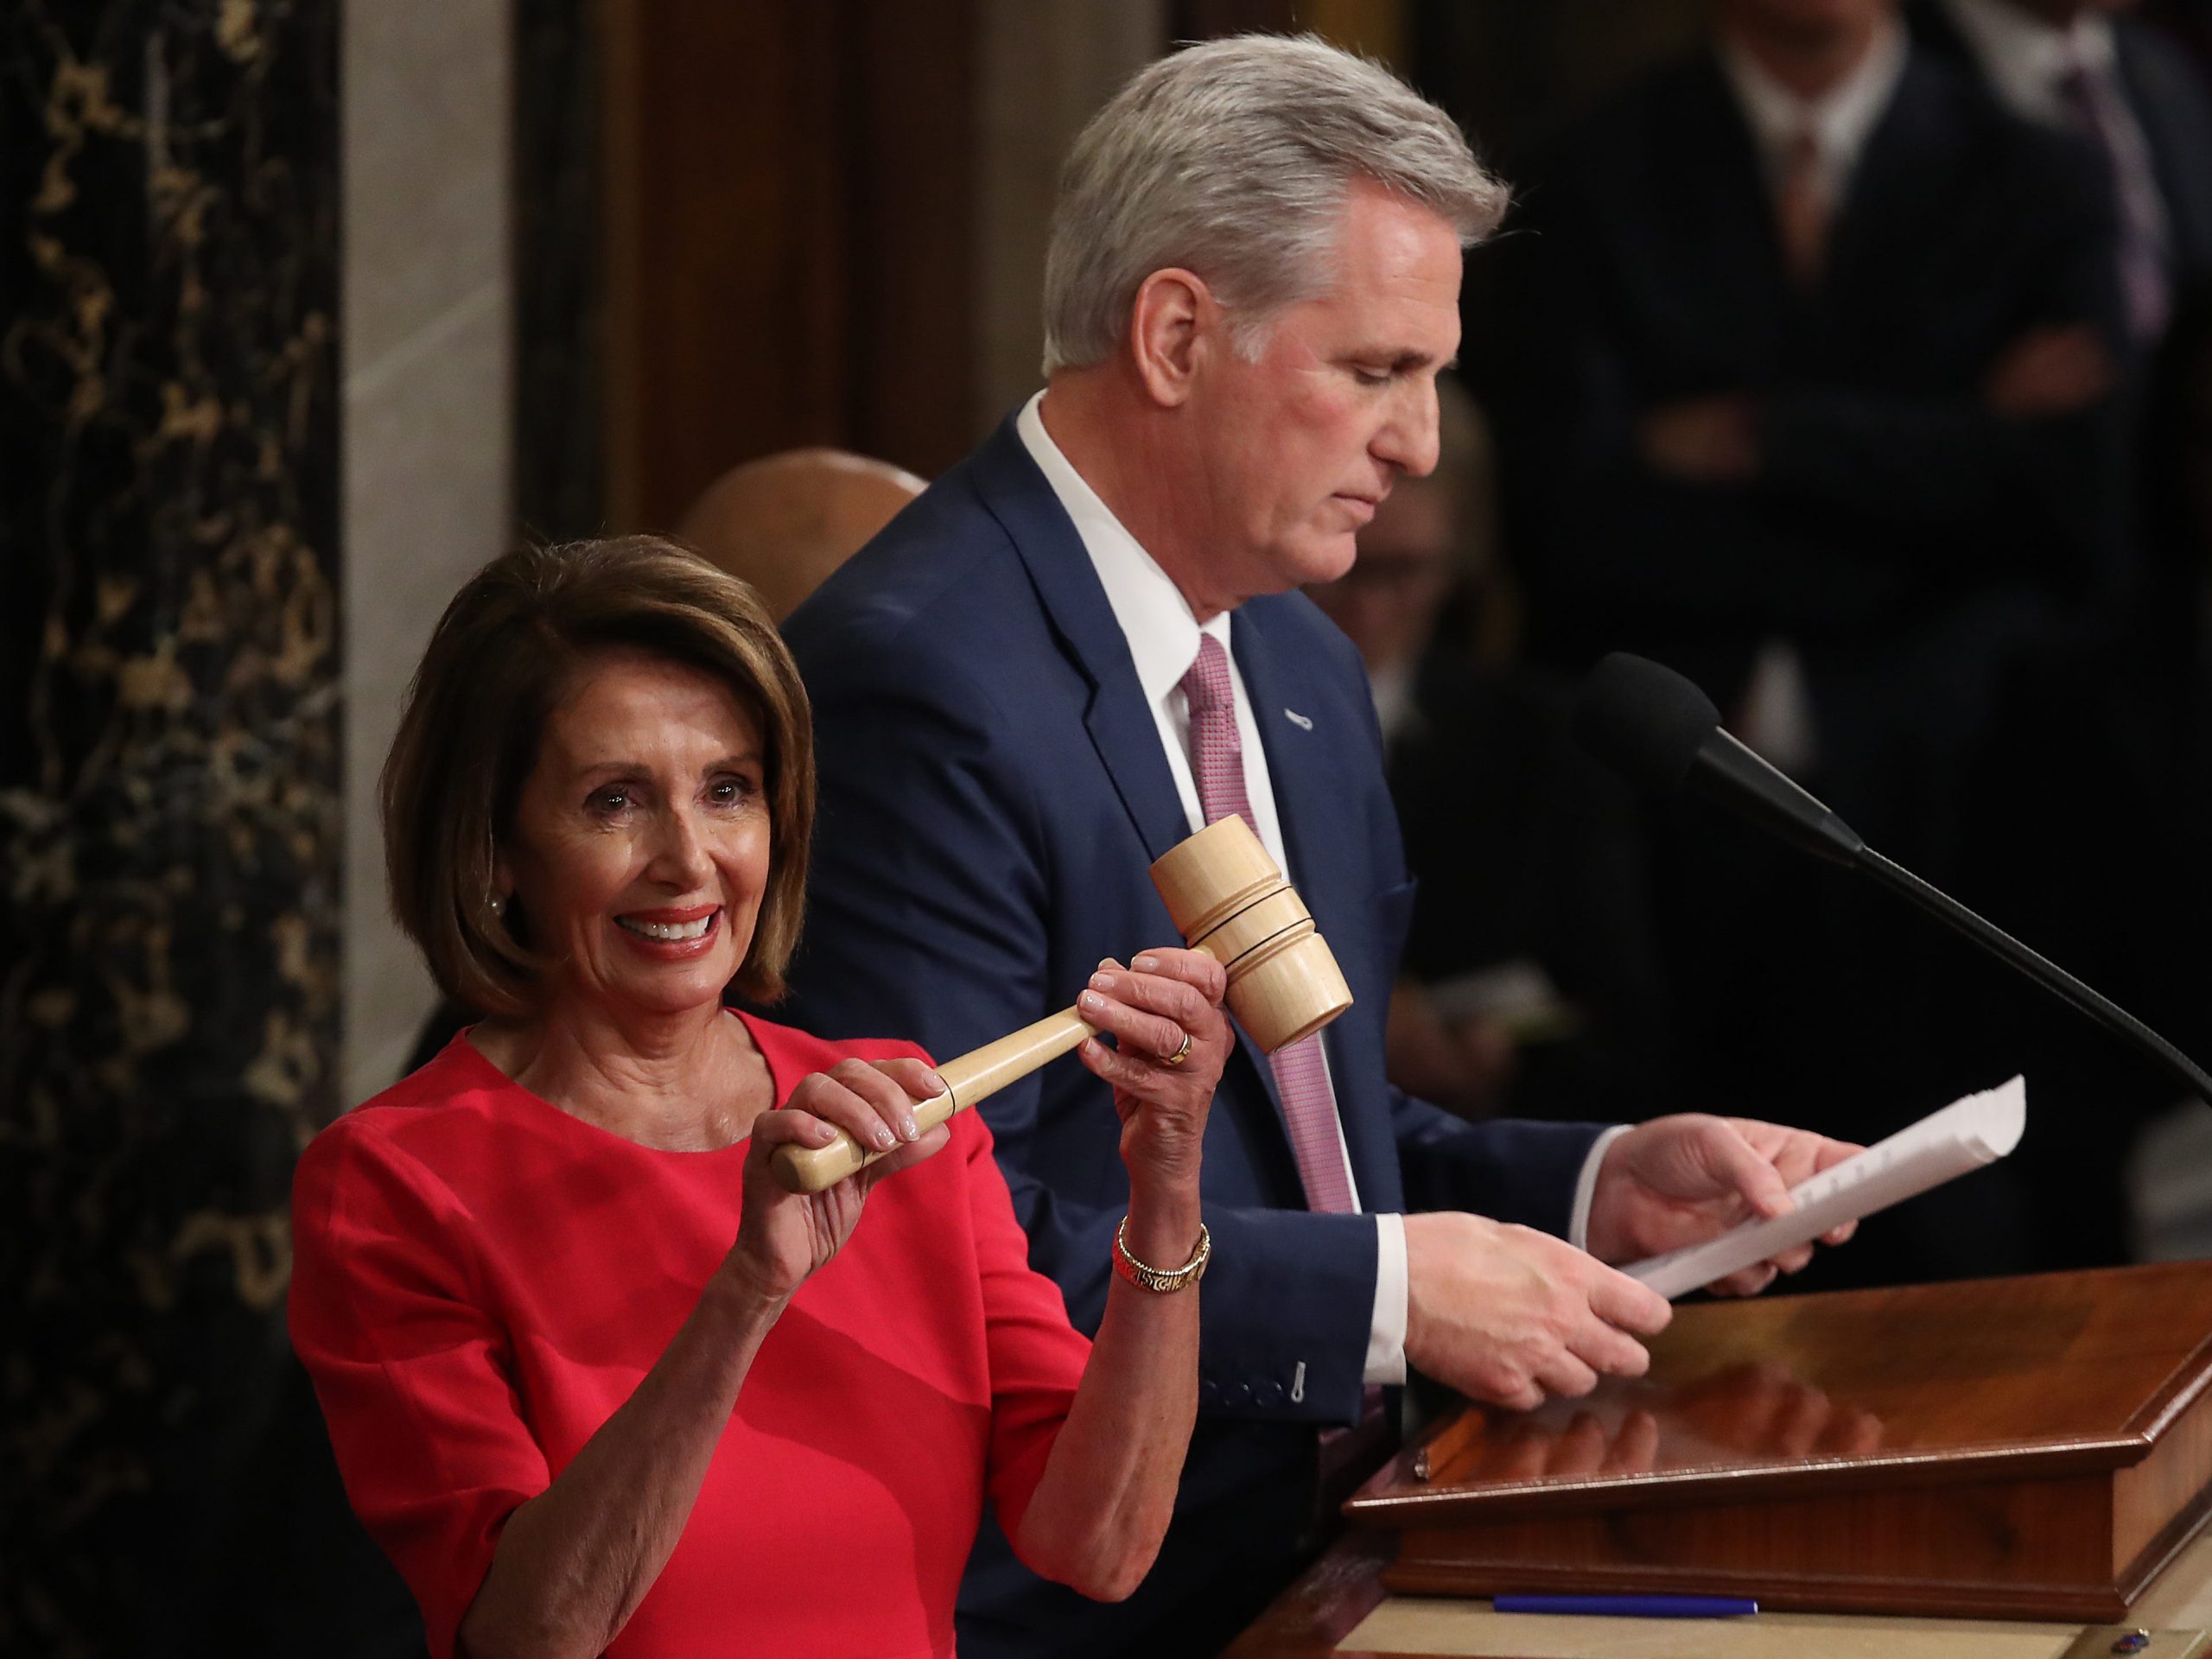 Pelosi holds gavel next to Kevin McCarthy